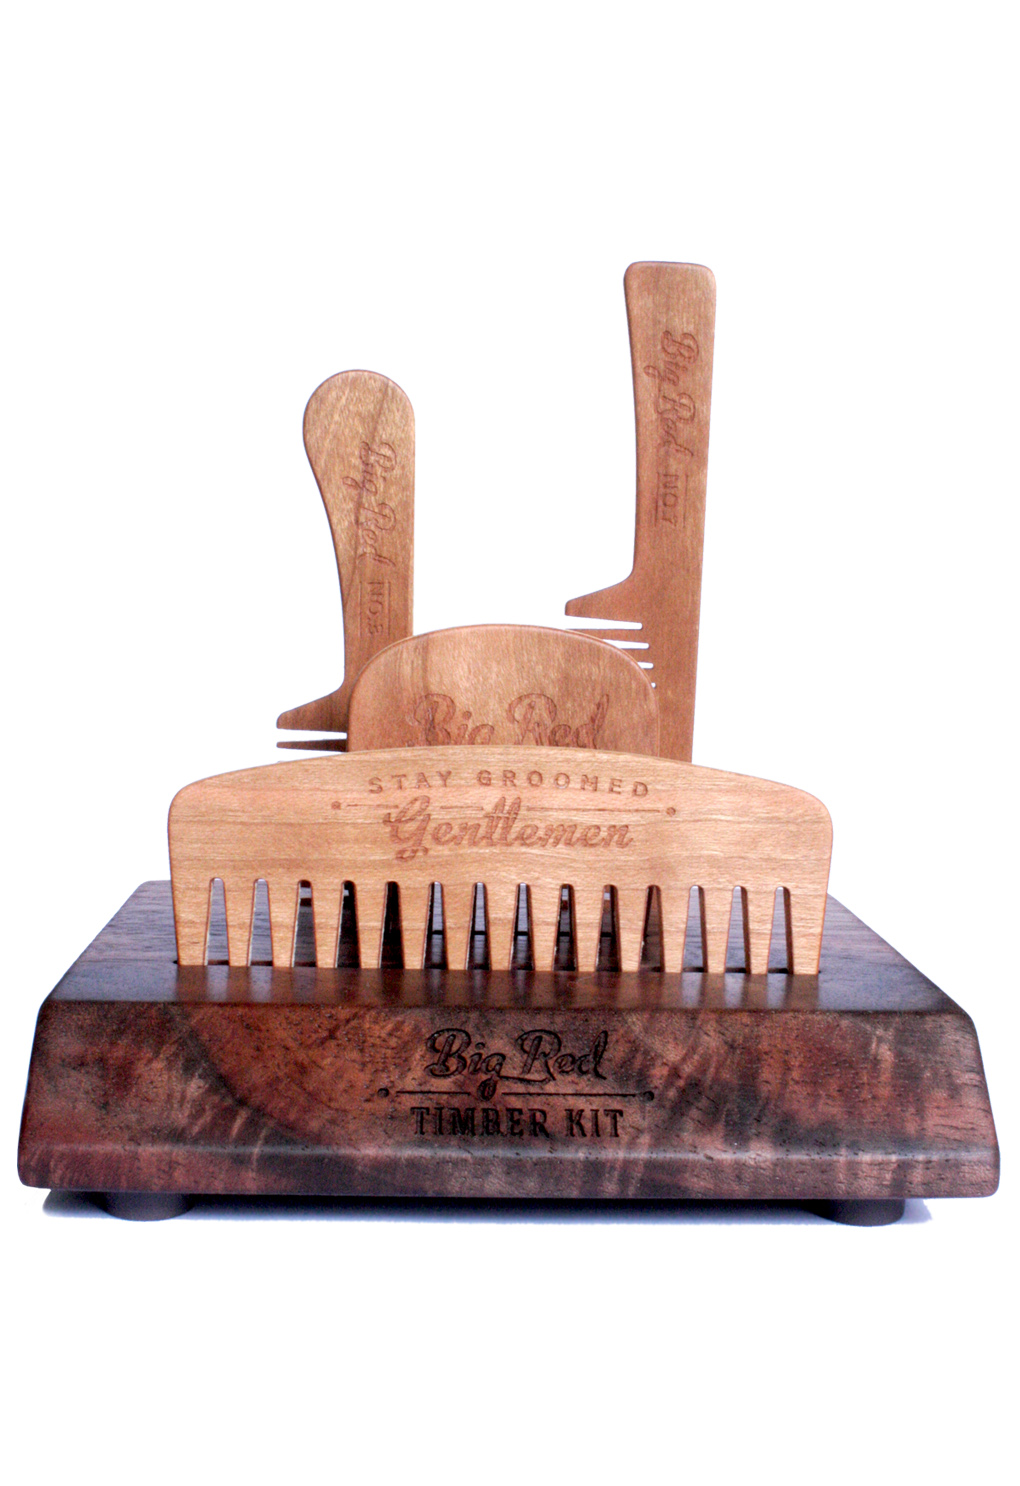 FINDS - Fathers Day Gift Guide -Big Red Beard Combs Timber Kit